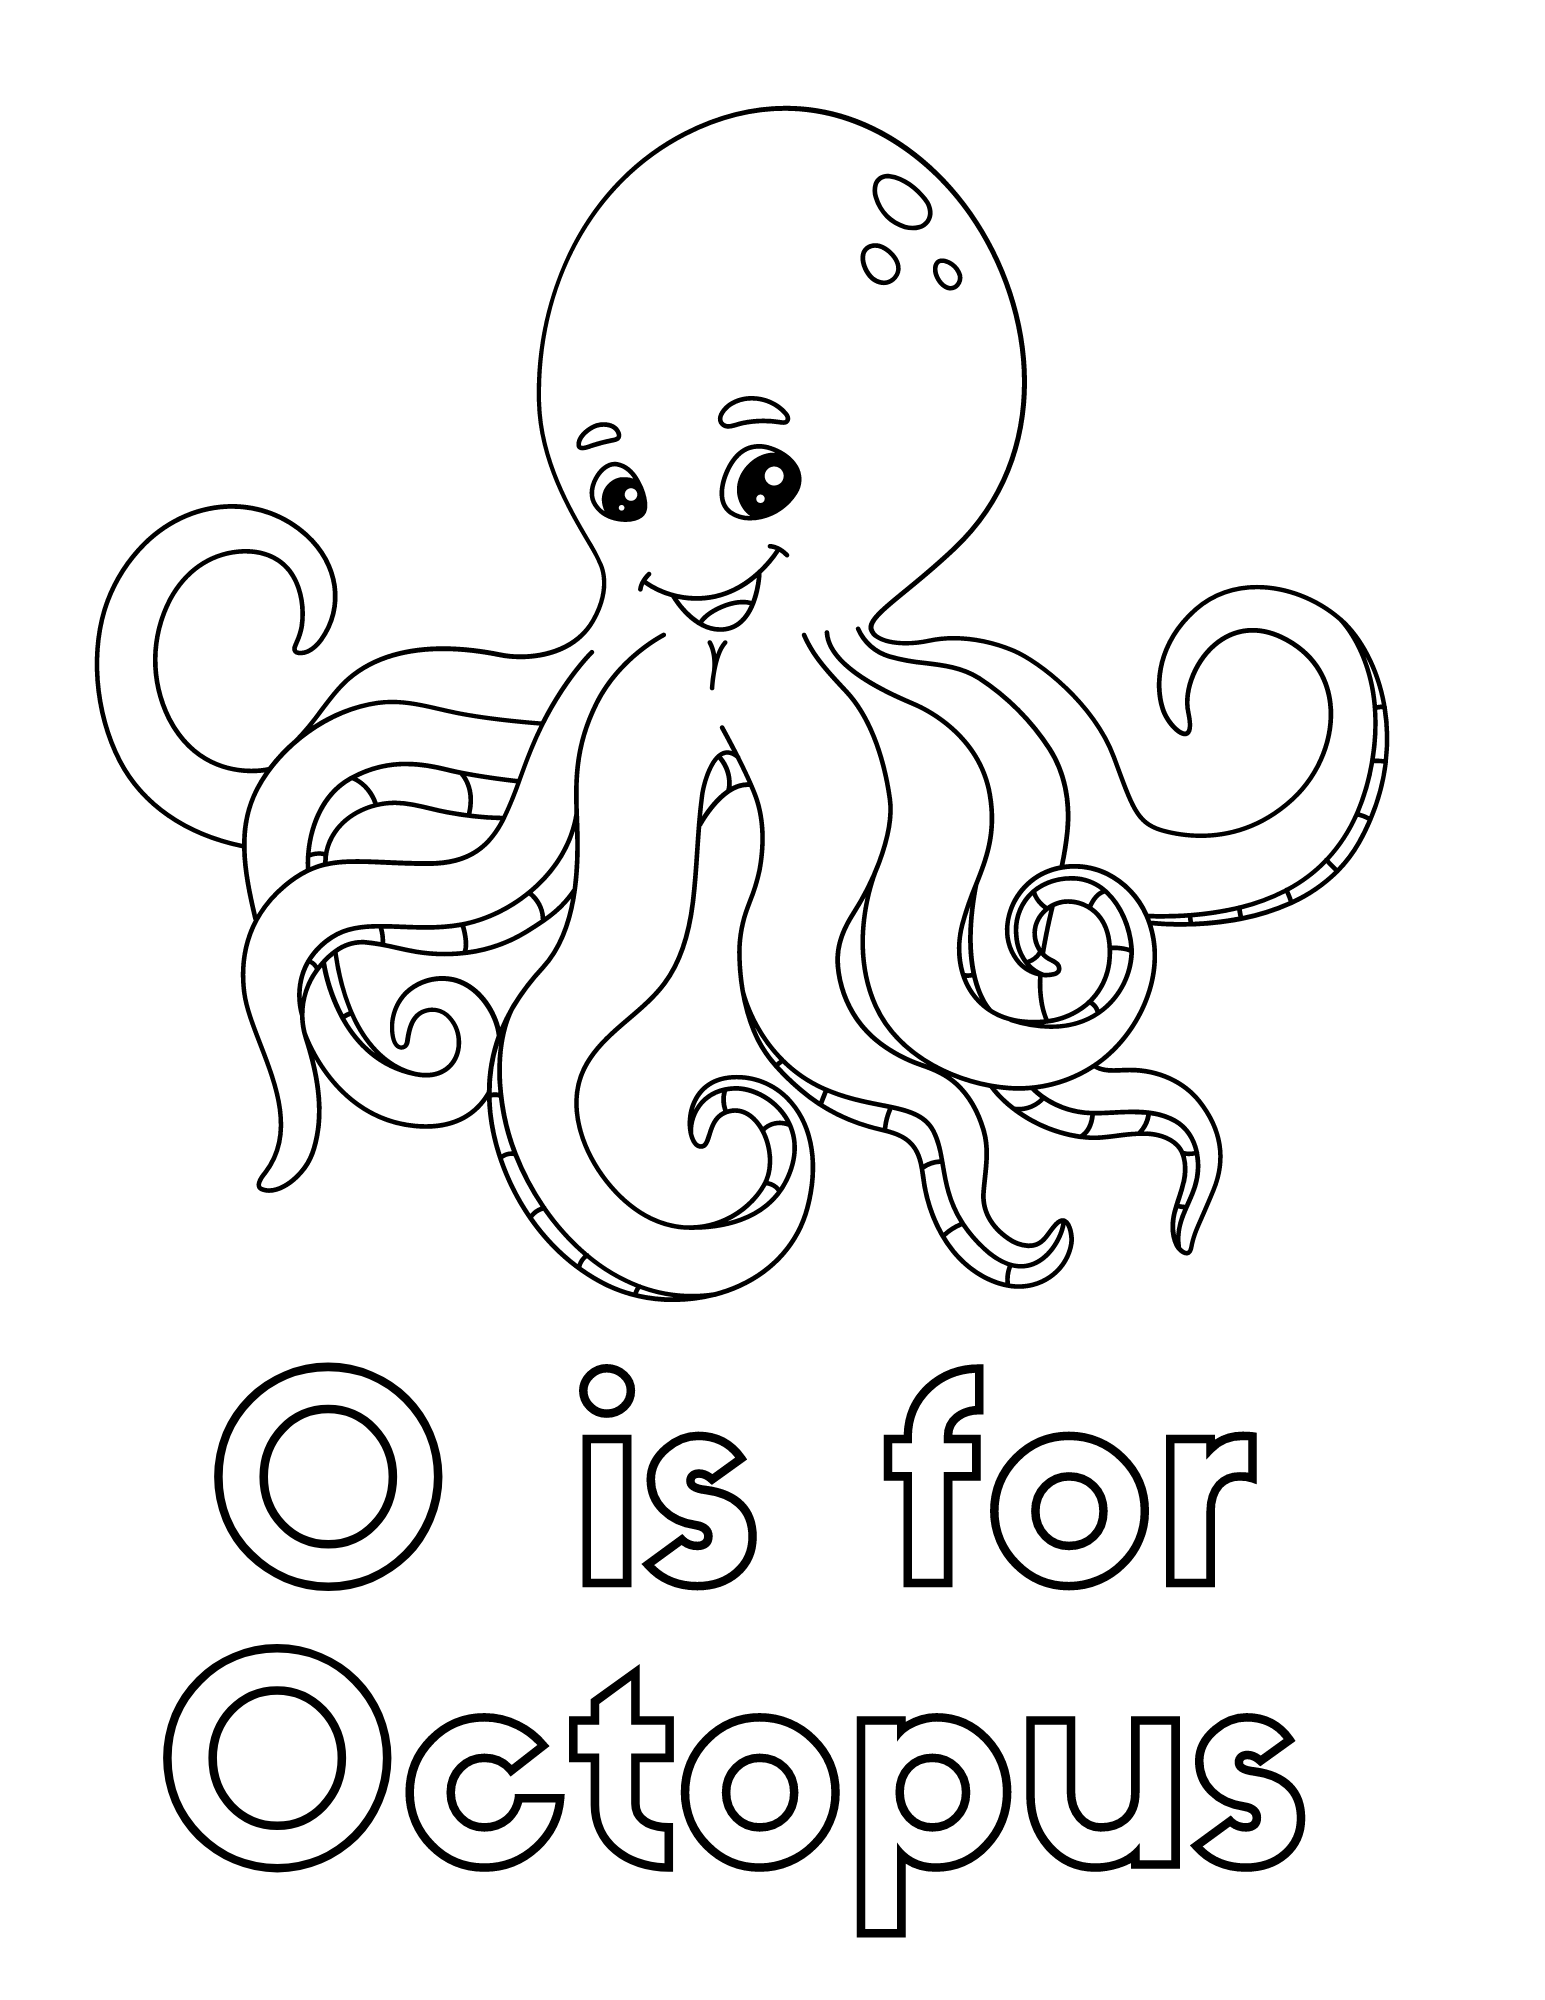 Free printable octopus coloring pages for kids and adults